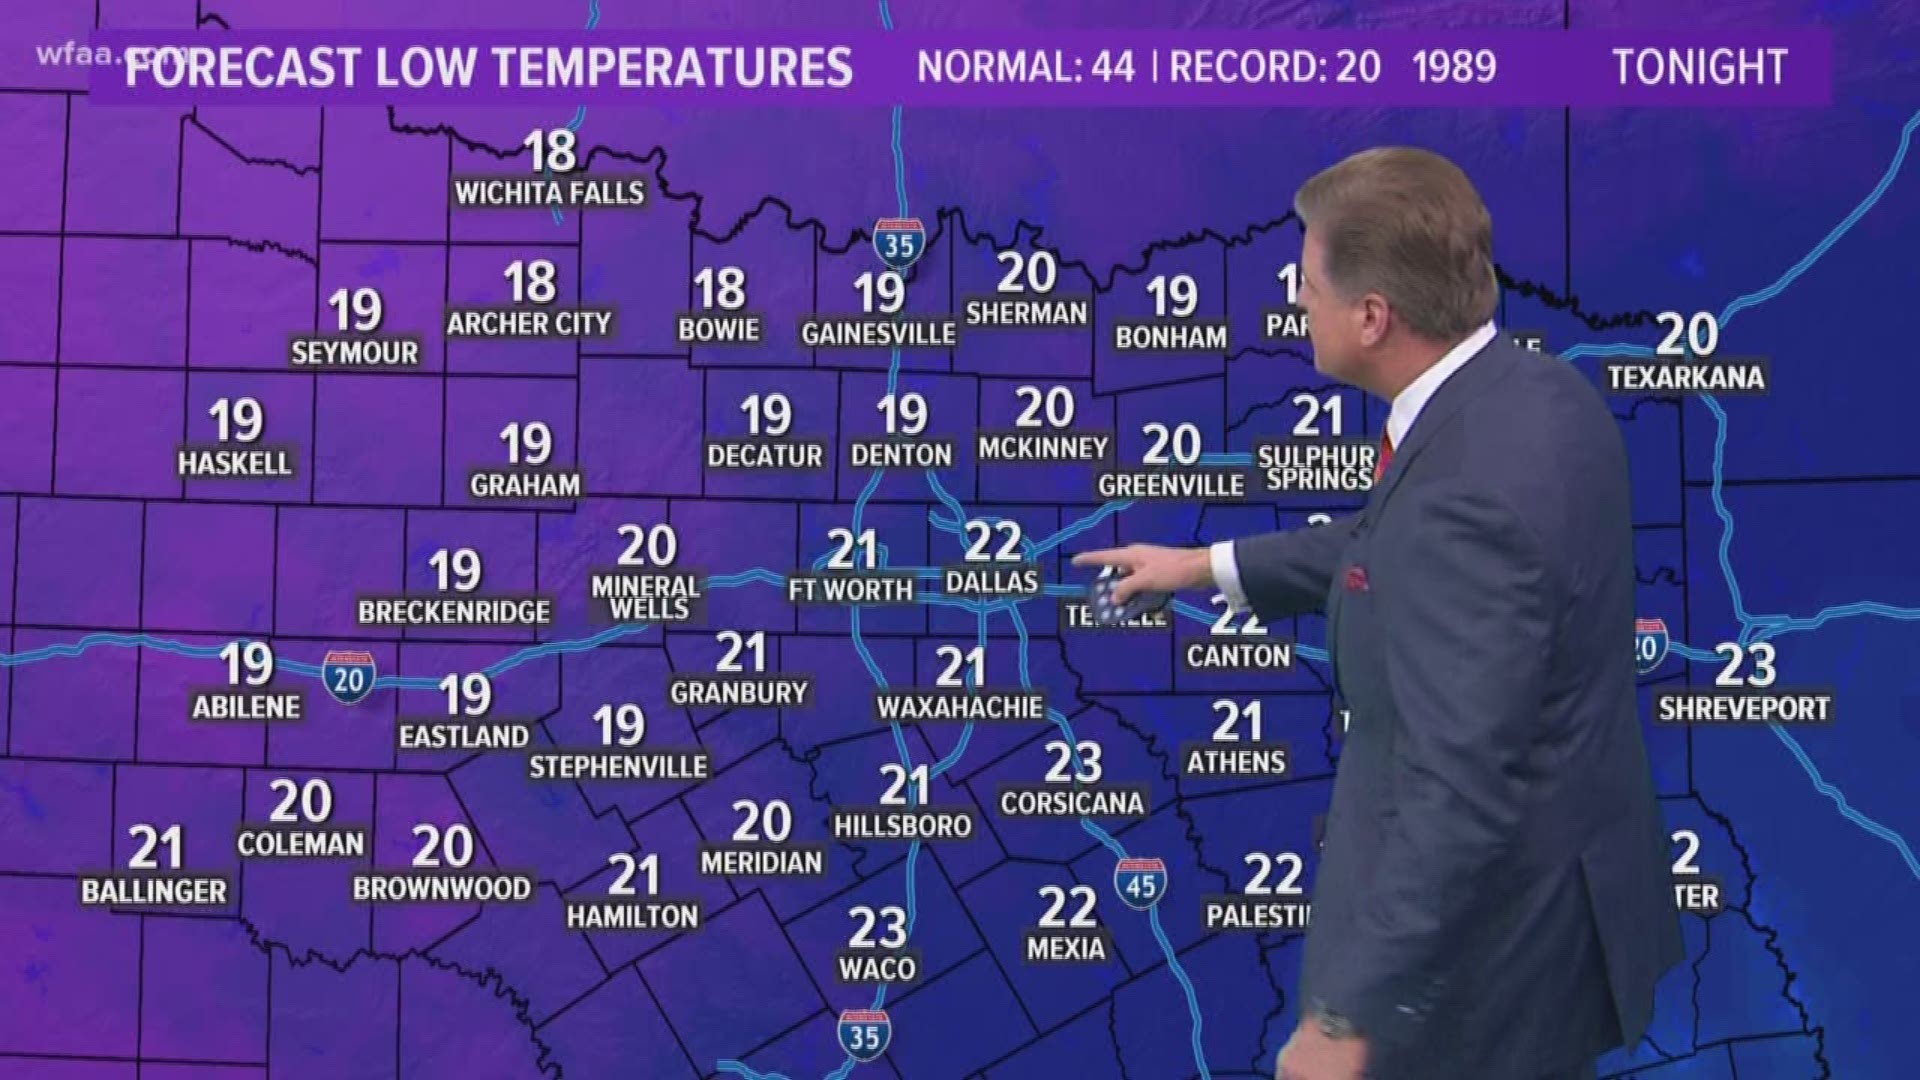 It only reached 32 degrees at DFW on Monday.